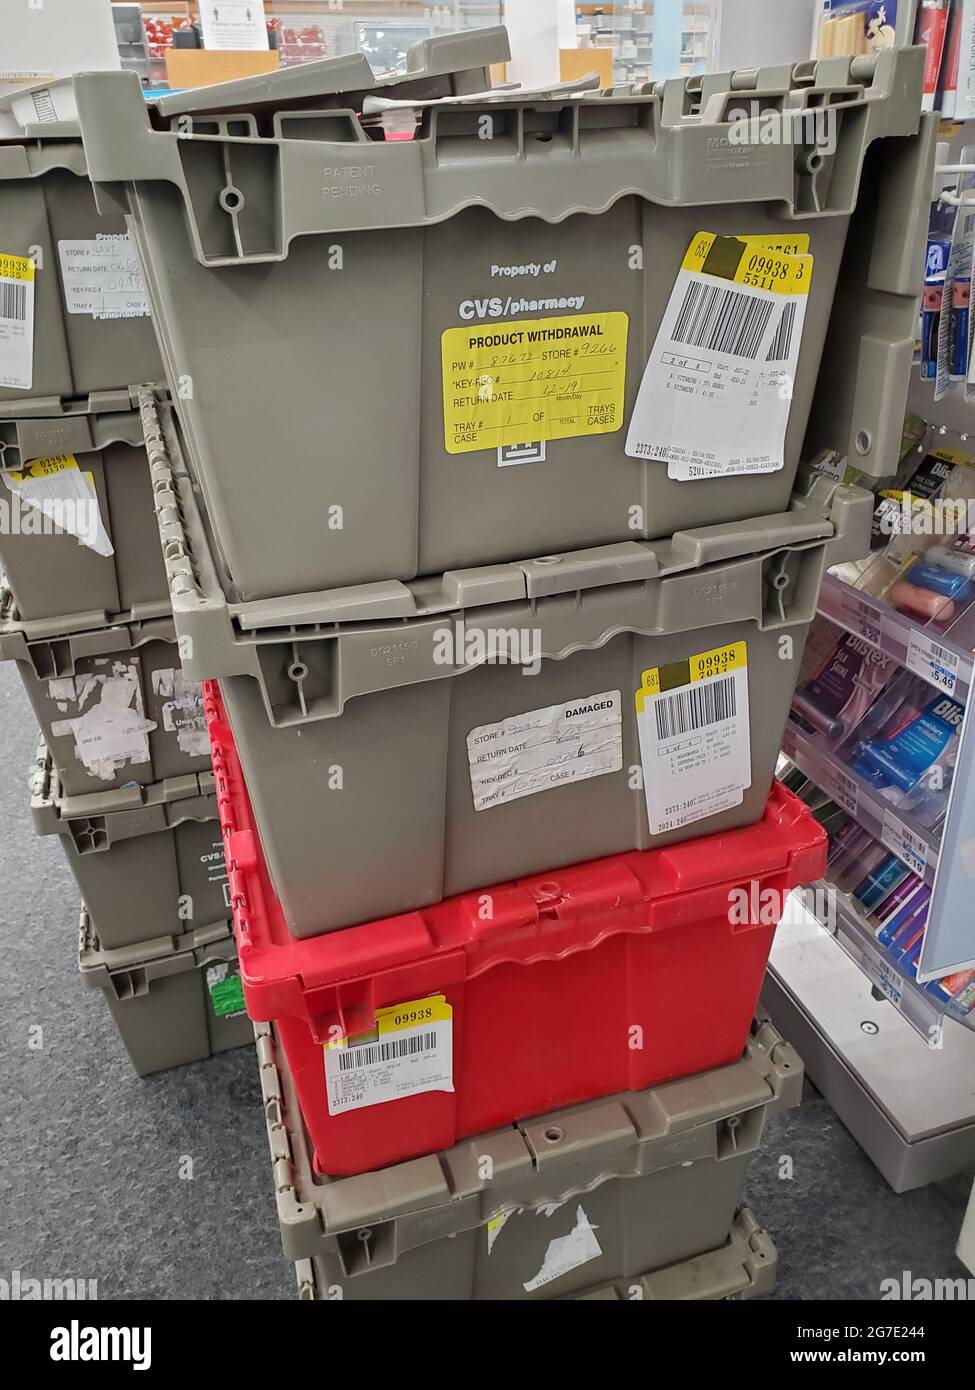 Boxes of product are visible during restocking process at CVS Pharmacy in Lafayette, California, May 21, 2021. () Stock Photo